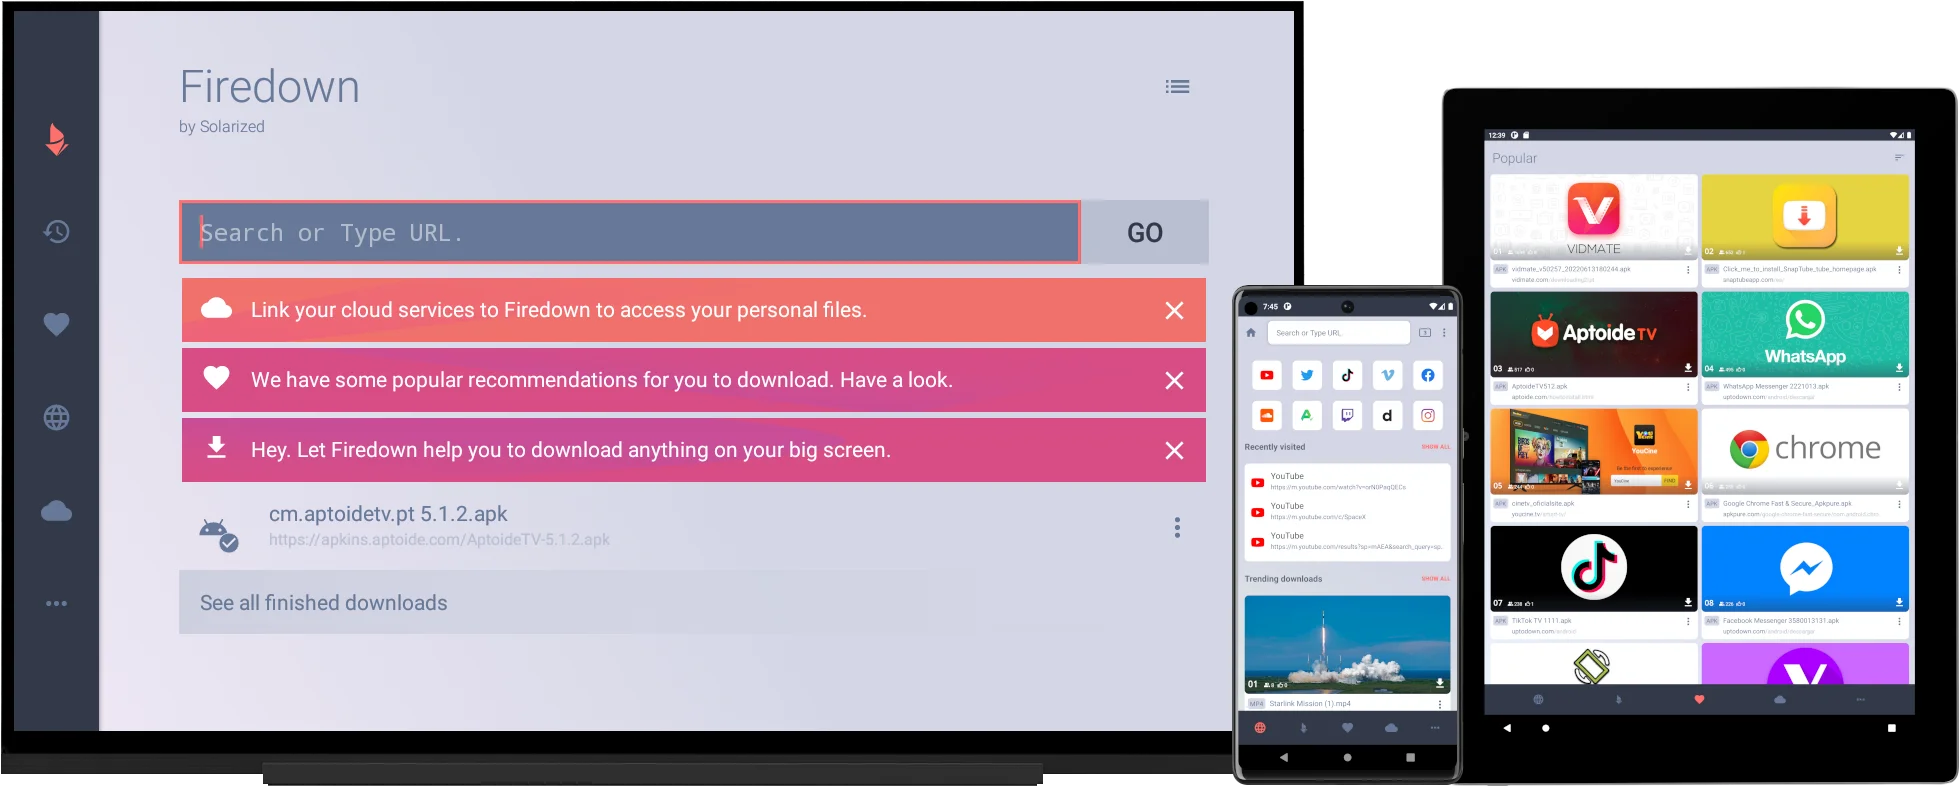 Firedown’s interface works on smartphones and tablets alike